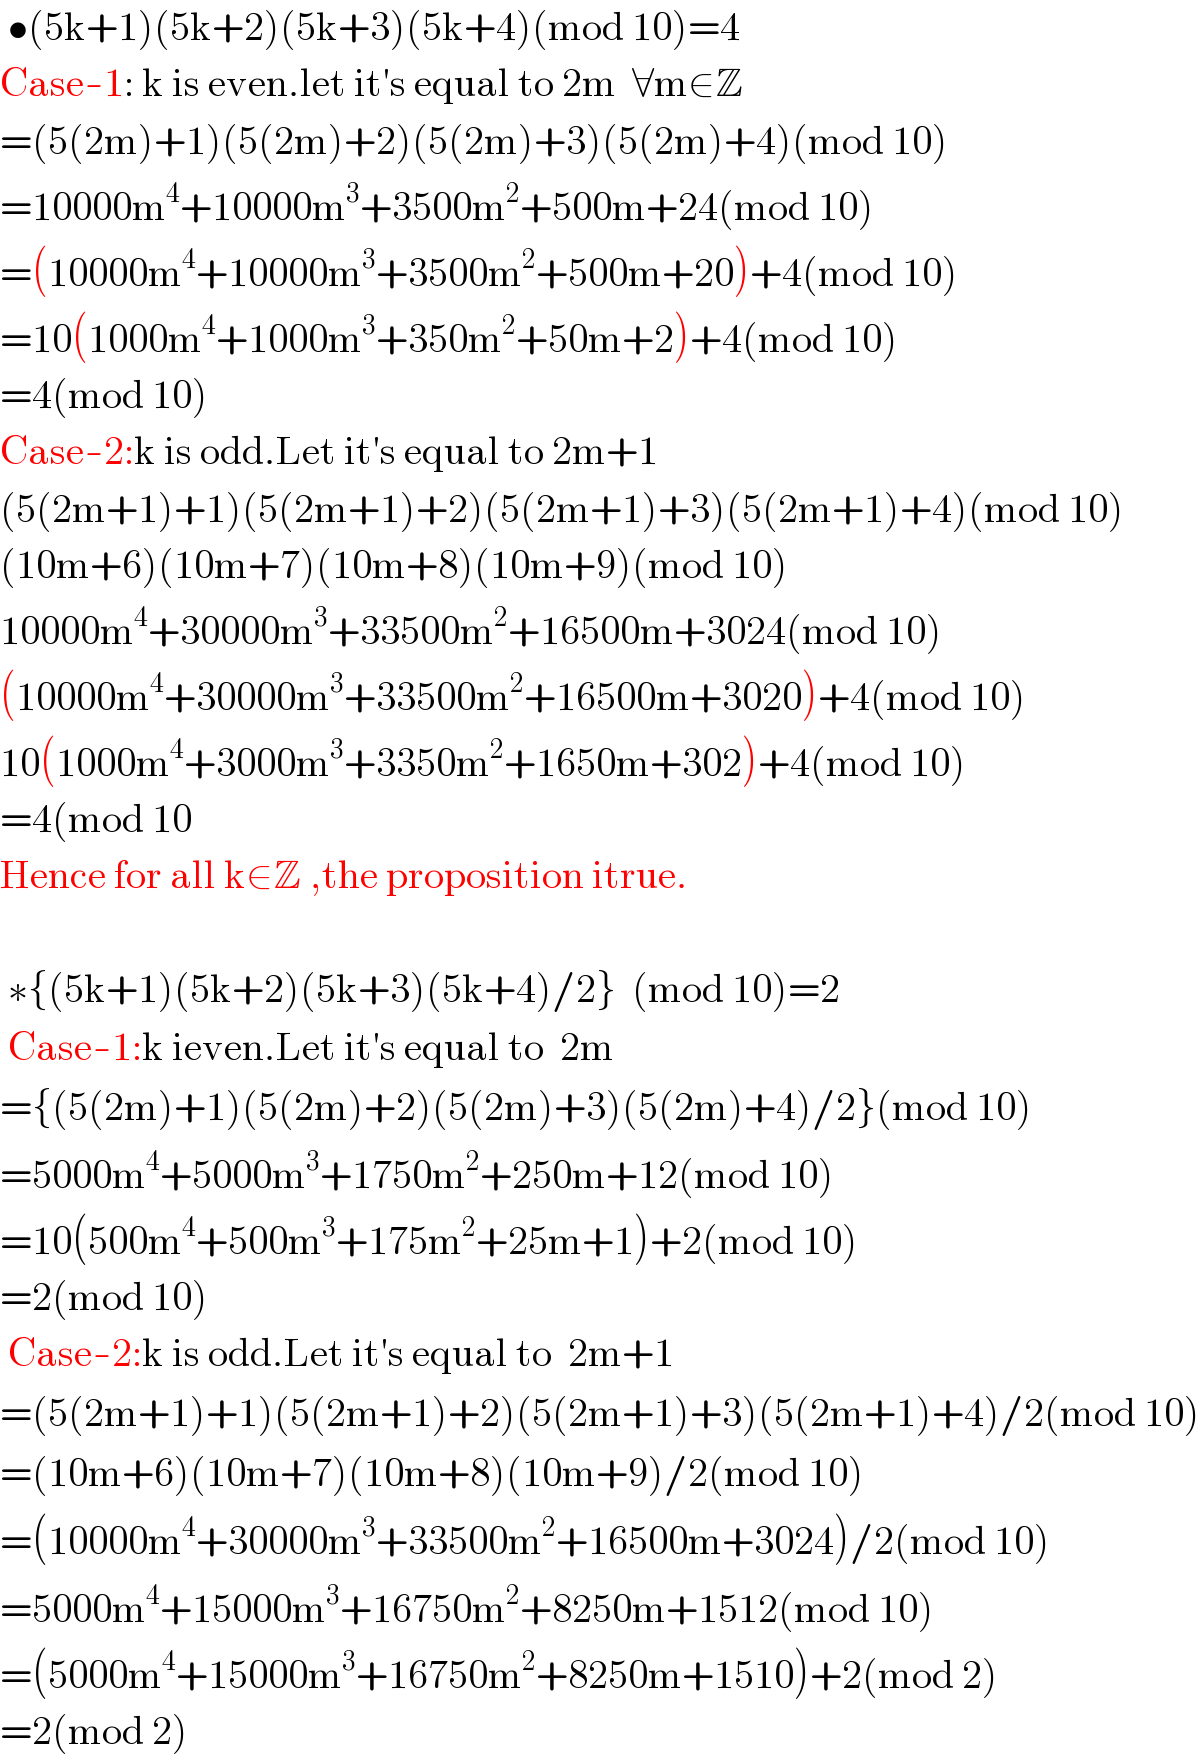  •(5k+1)(5k+2)(5k+3)(5k+4)(mod 10)=4  Case-1: k is even.let it′s equal to 2m  ∀m∈Z  =(5(2m)+1)(5(2m)+2)(5(2m)+3)(5(2m)+4)(mod 10)  =10000m^4 +10000m^3 +3500m^2 +500m+24(mod 10)  =(10000m^4 +10000m^3 +3500m^2 +500m+20)+4(mod 10)  =10(1000m^4 +1000m^3 +350m^2 +50m+2)+4(mod 10)  =4(mod 10)    Case-2:k is odd.Let it′s equal to 2m+1  (5(2m+1)+1)(5(2m+1)+2)(5(2m+1)+3)(5(2m+1)+4)(mod 10)  (10m+6)(10m+7)(10m+8)(10m+9)(mod 10)  10000m^4 +30000m^3 +33500m^2 +16500m+3024(mod 10)  (10000m^4 +30000m^3 +33500m^2 +16500m+3020)+4(mod 10)  10(1000m^4 +3000m^3 +3350m^2 +1650m+302)+4(mod 10)  =4(mod 10     Hence for all k∈Z ,the proposition itrue.     ∗{(5k+1)(5k+2)(5k+3)(5k+4)/2}  (mod 10)=2   Case-1:k ieven.Let it′s equal to  2m  ={(5(2m)+1)(5(2m)+2)(5(2m)+3)(5(2m)+4)/2}(mod 10)  =5000m^4 +5000m^3 +1750m^2 +250m+12(mod 10)  =10(500m^4 +500m^3 +175m^2 +25m+1)+2(mod 10)  =2(mod 10)   Case-2:k is odd.Let it′s equal to  2m+1  =(5(2m+1)+1)(5(2m+1)+2)(5(2m+1)+3)(5(2m+1)+4)/2(mod 10)  =(10m+6)(10m+7)(10m+8)(10m+9)/2(mod 10)  =(10000m^4 +30000m^3 +33500m^2 +16500m+3024)/2(mod 10)  =5000m^4 +15000m^3 +16750m^2 +8250m+1512(mod 10)  =(5000m^4 +15000m^3 +16750m^2 +8250m+1510)+2(mod 2)  =2(mod 2)  